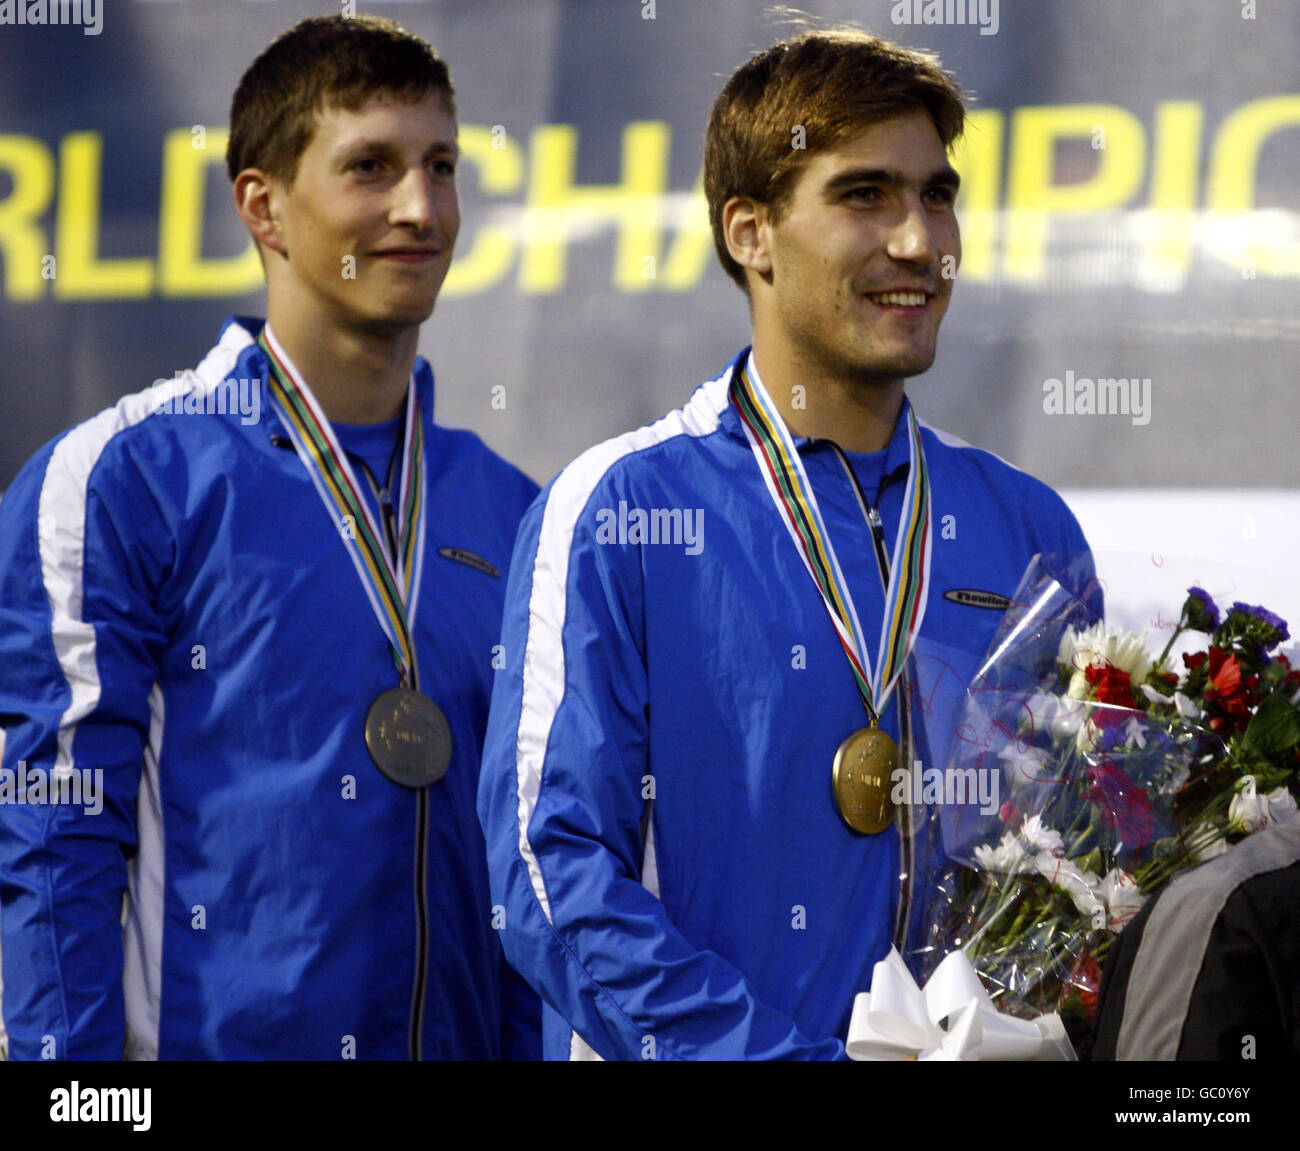 Czech Republic's Ondrej Polivka (left) and David Svoboda with their gold medals following the Men's Relay event during the Modern Pentathlon World Championships, London. Stock Photo